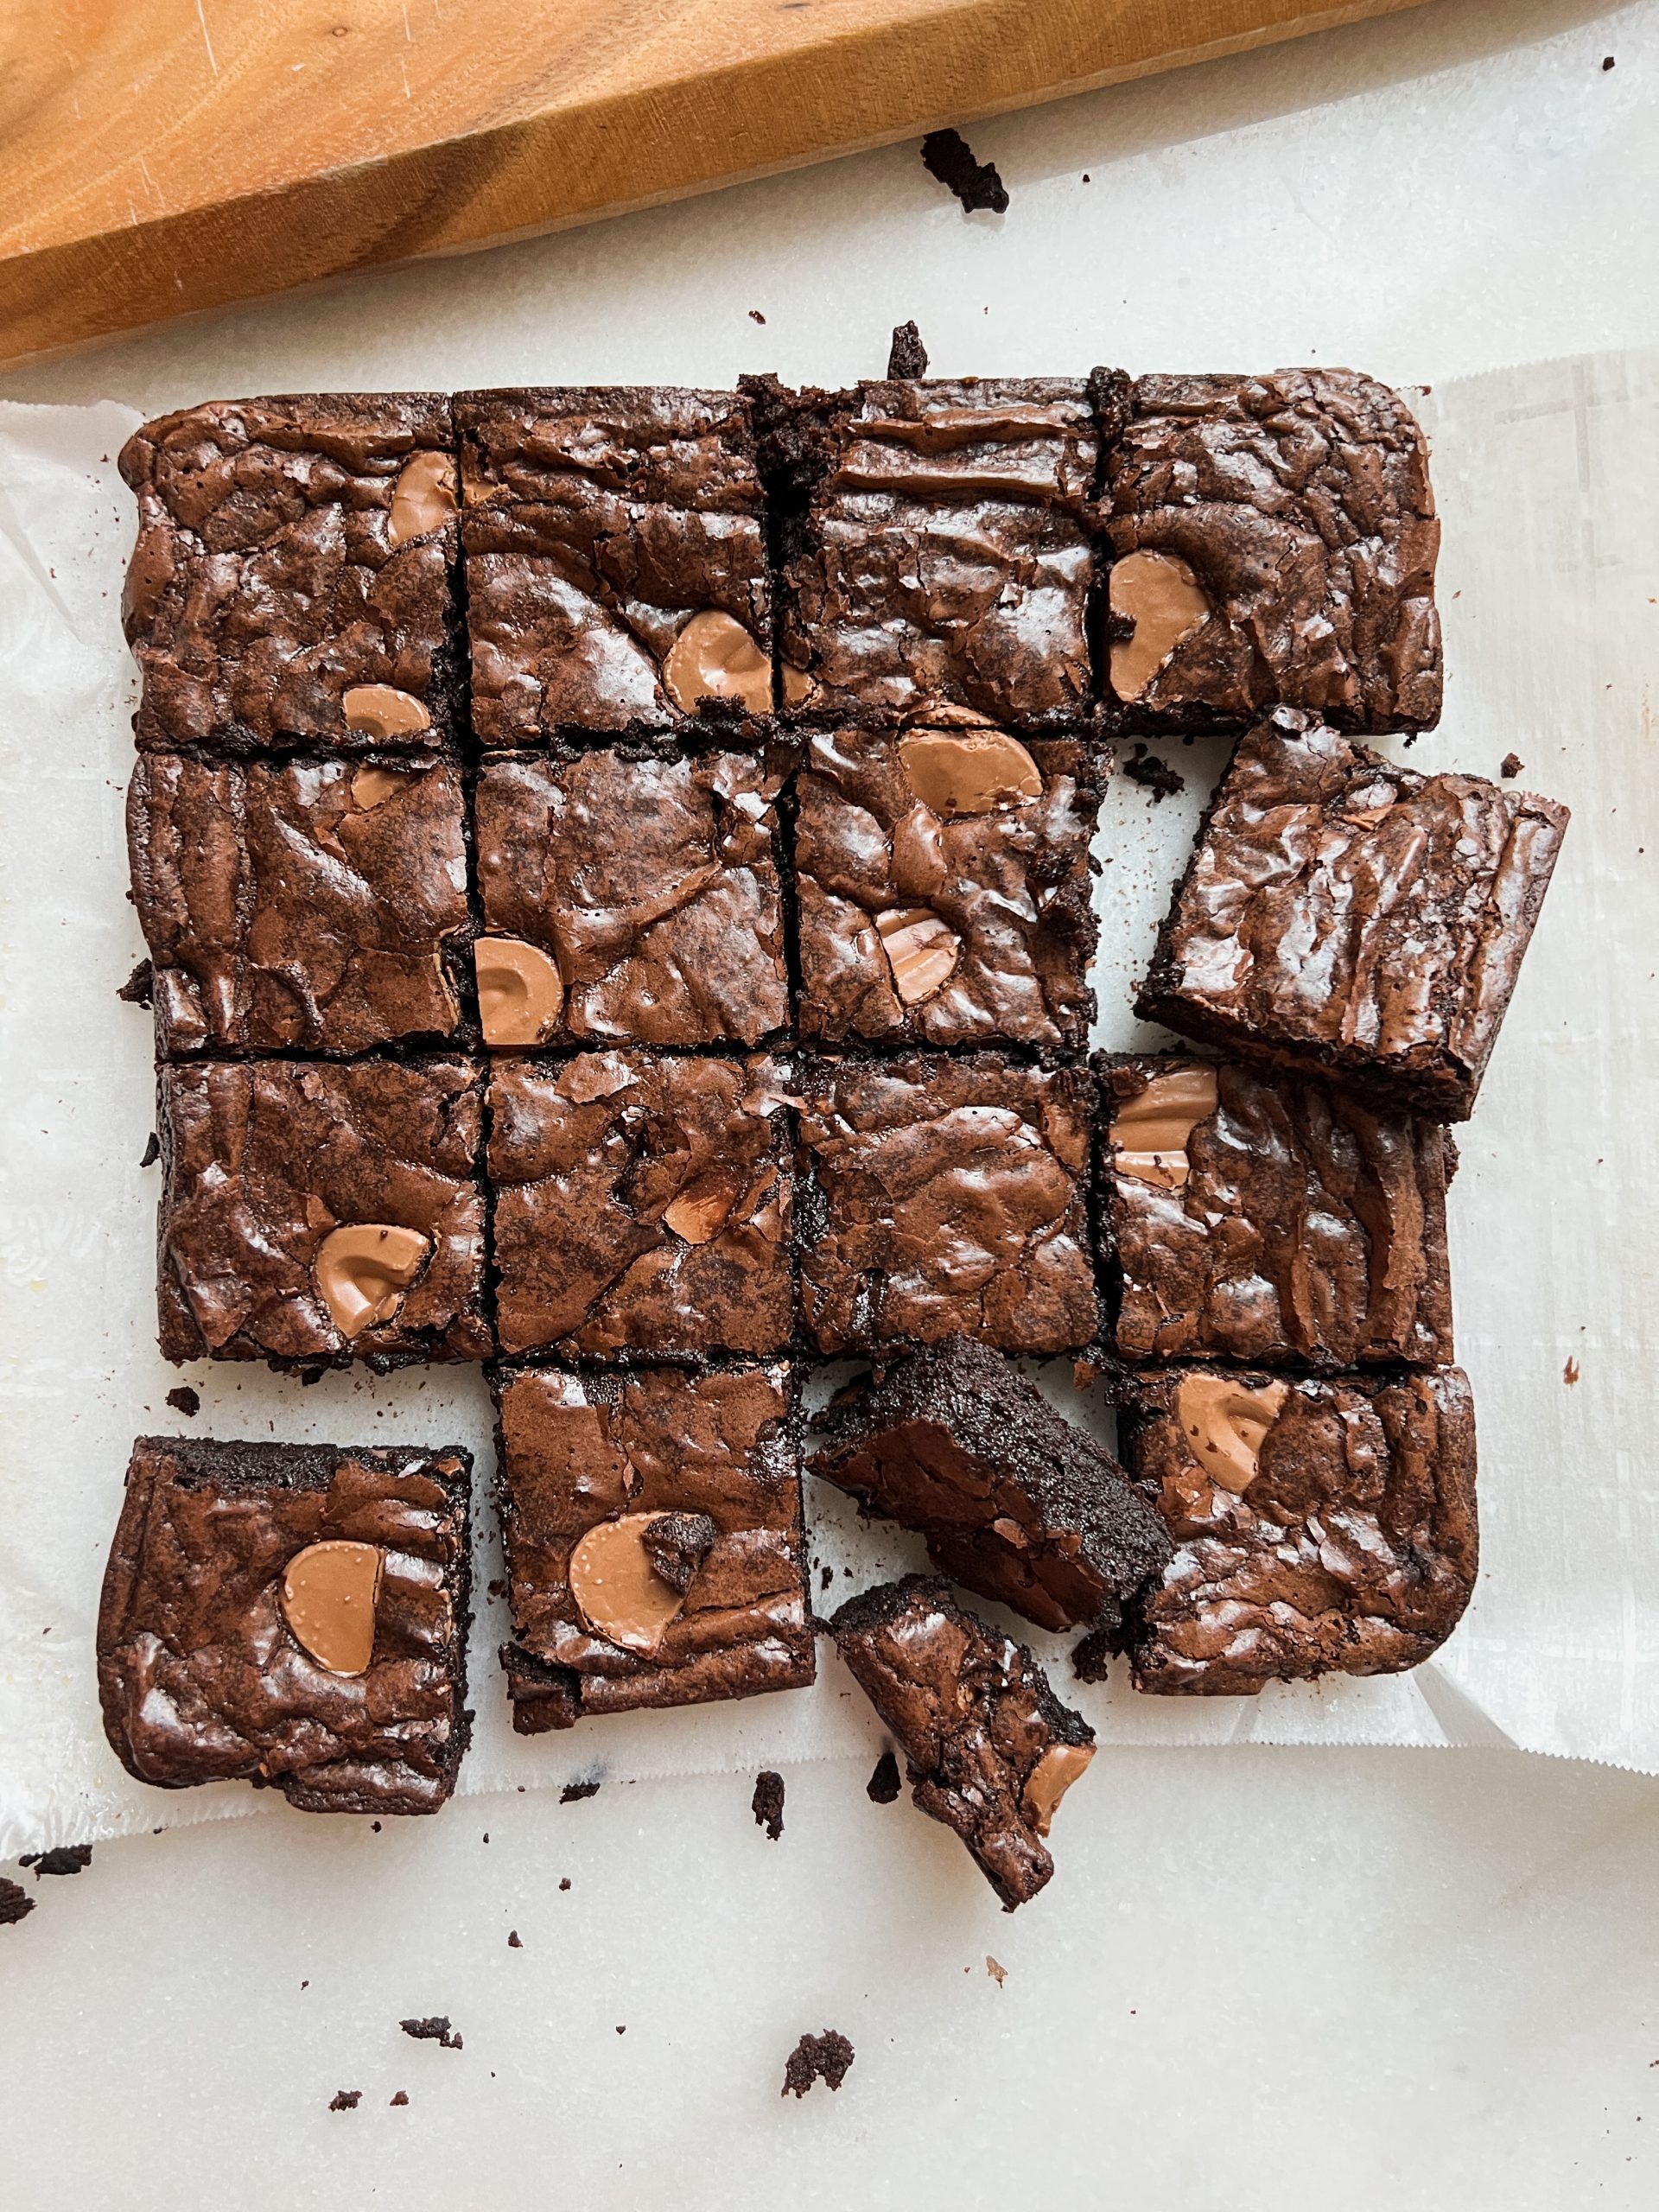 Overhead picture of sliced brownies on parchment paper. Brownies have shiny crinkly top and fudgy interior with chopped chocolate throughout. Three brownies are placed haphazarly